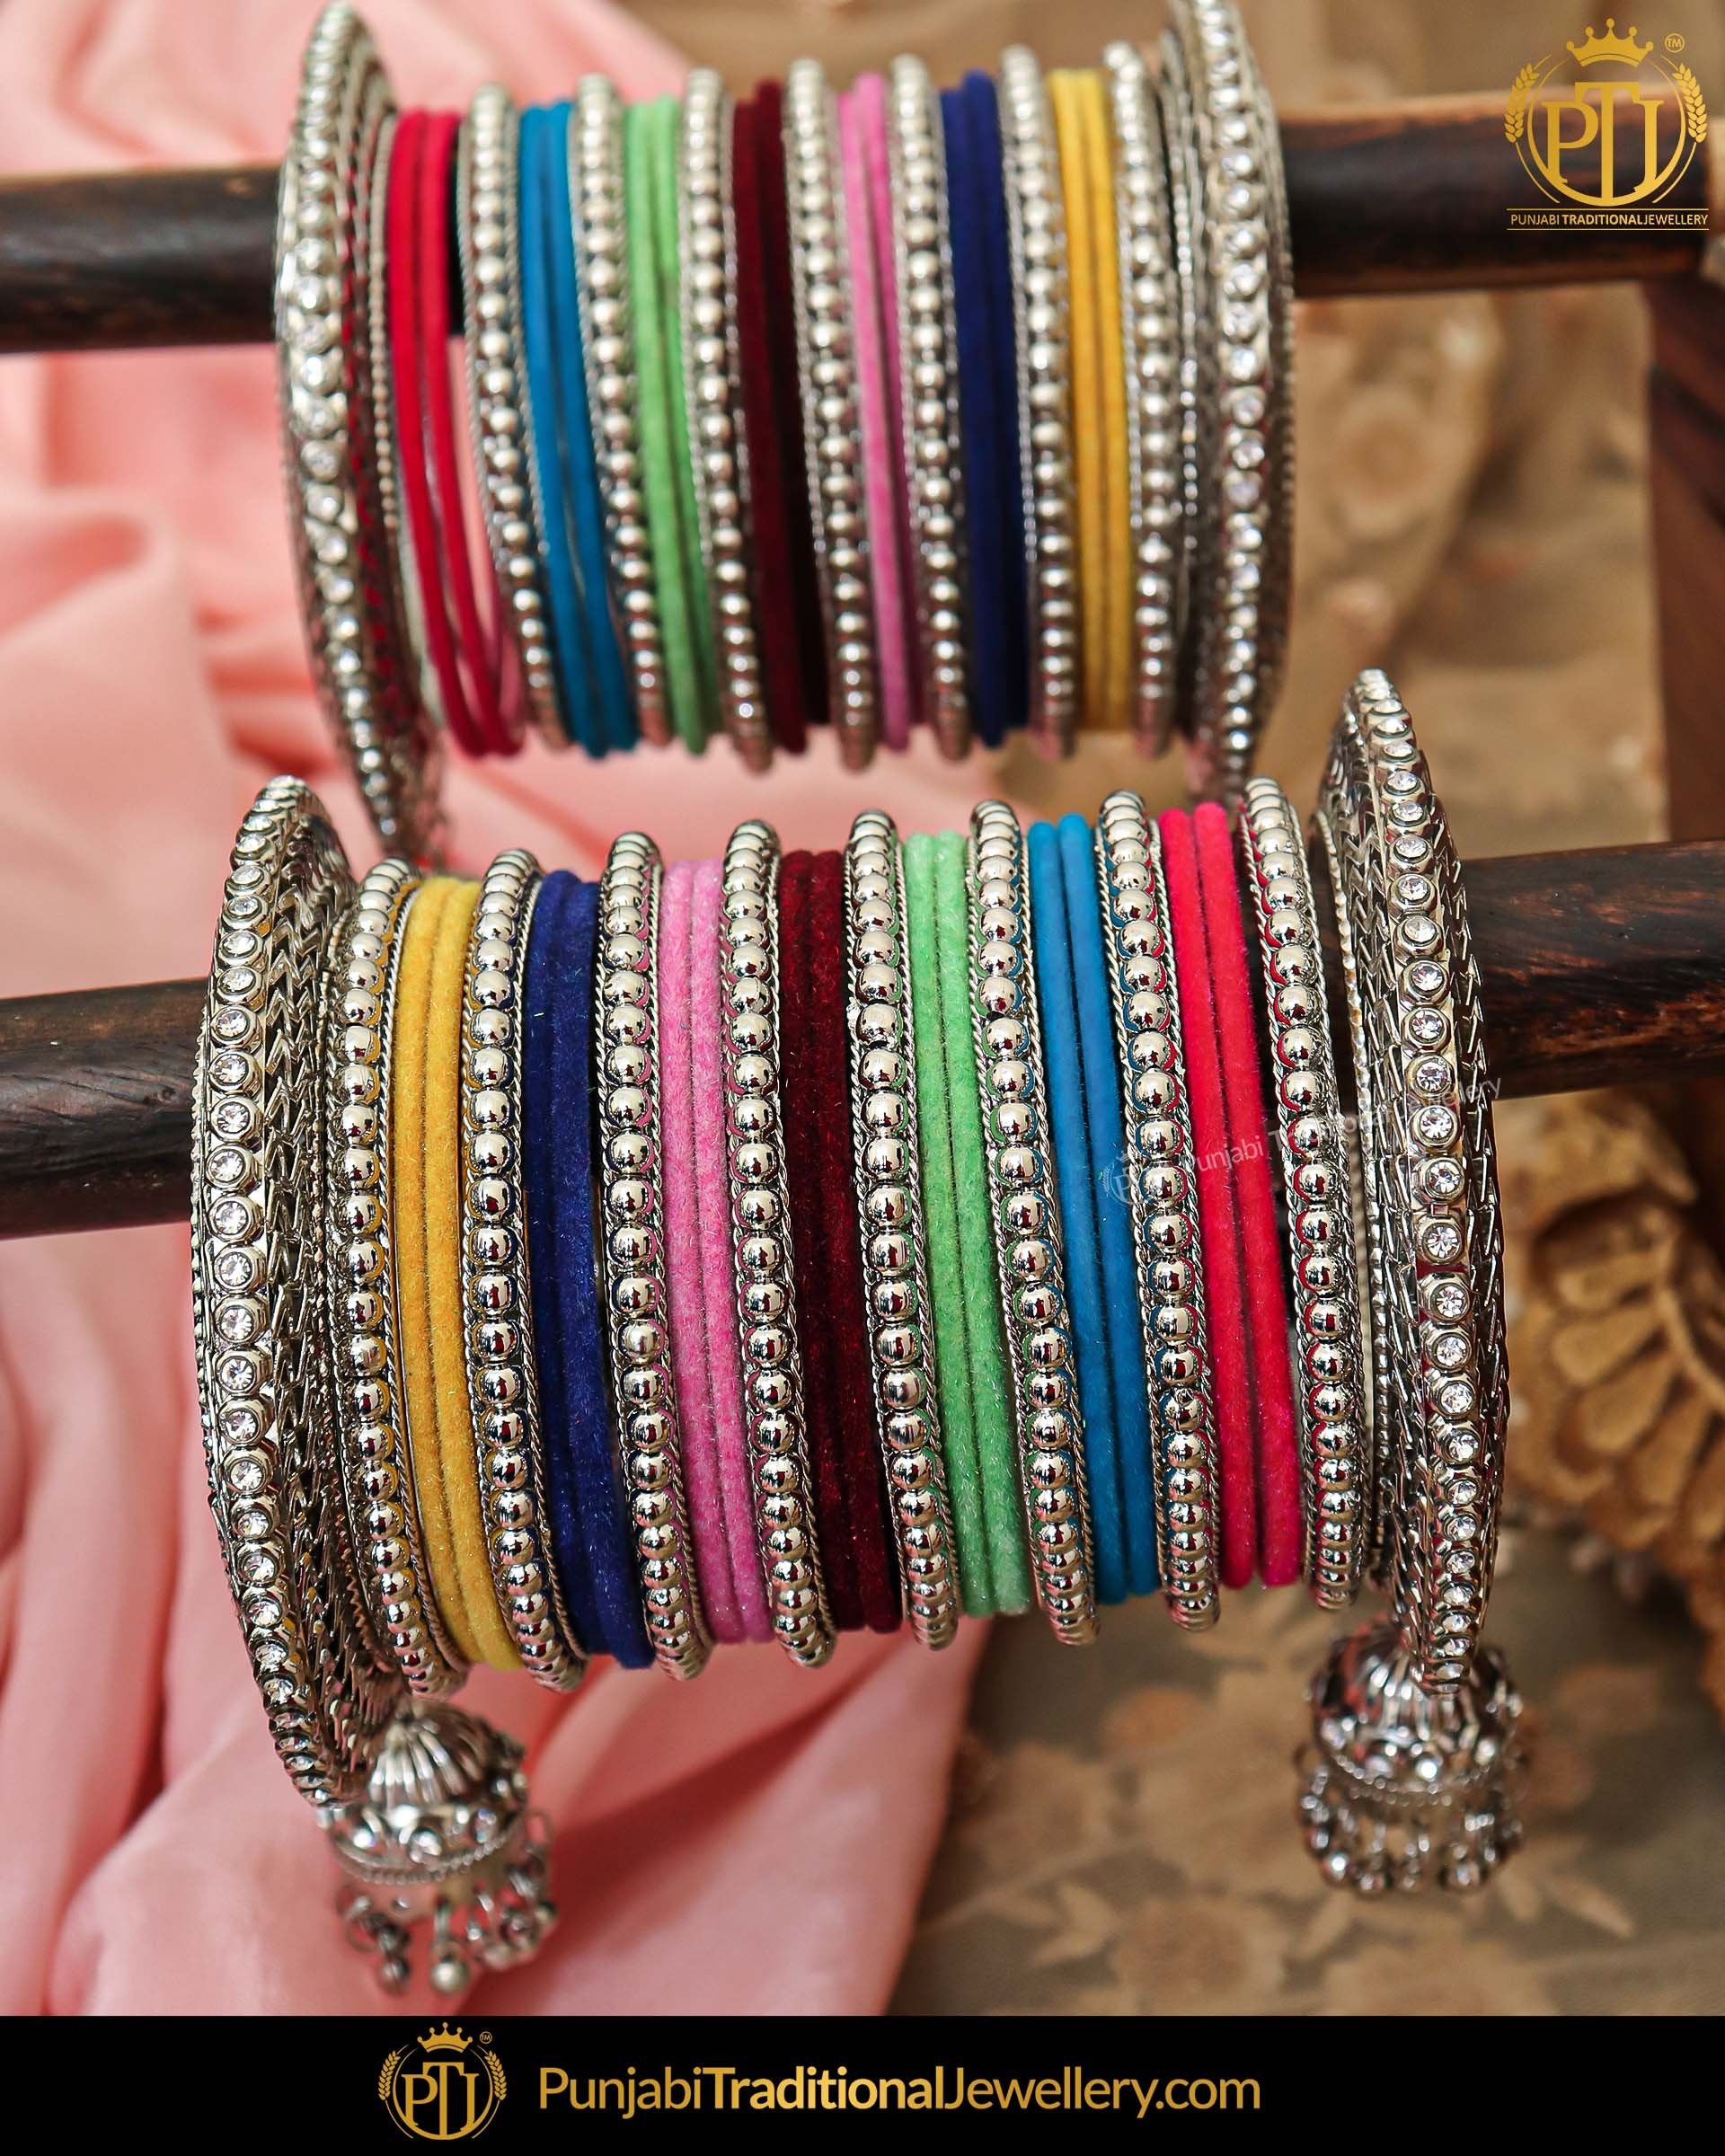 Silver Plated Multi Pearl Bangles Set For Both Hands | Punjabi Traditional Jewellery Exclusive